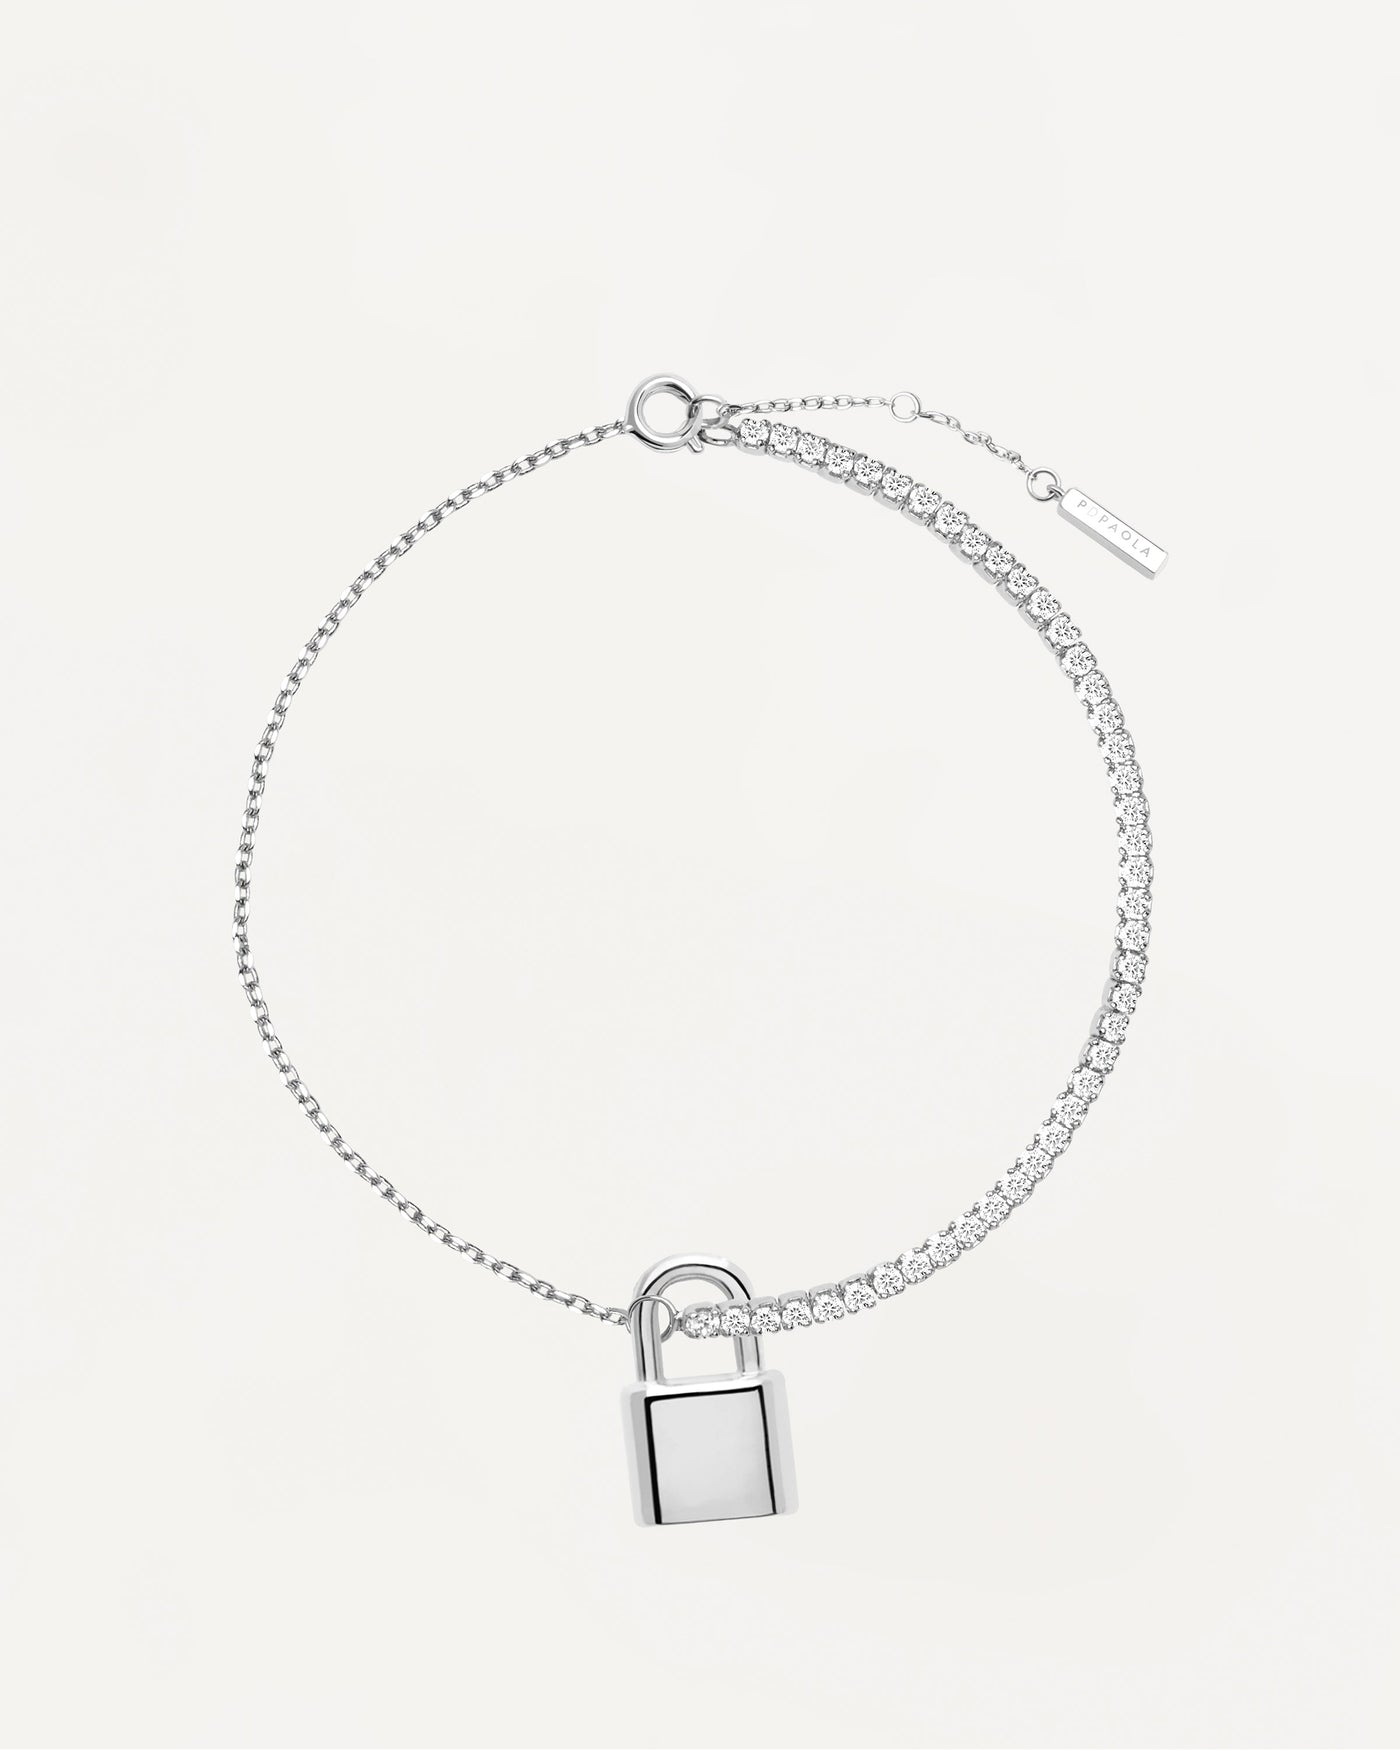 2023 Selection | Bond Silver Bracelet. Sterling silver bracelet with white zirconia and personalized padlock pendant. Get the latest arrival from PDPAOLA. Place your order safely and get this Best Seller. Free Shipping.